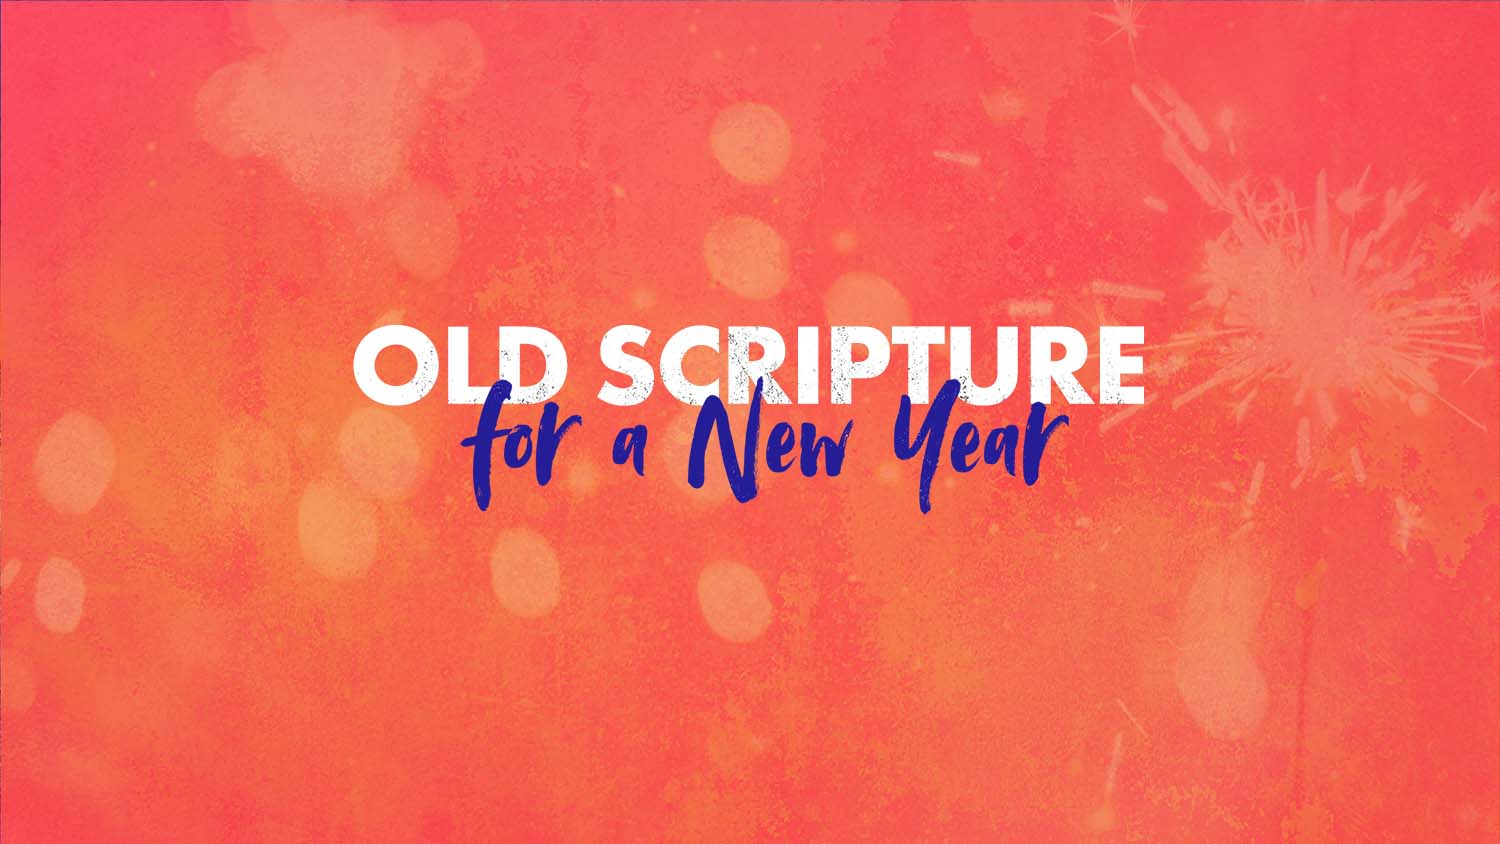 Old Scripture for a New Year Image